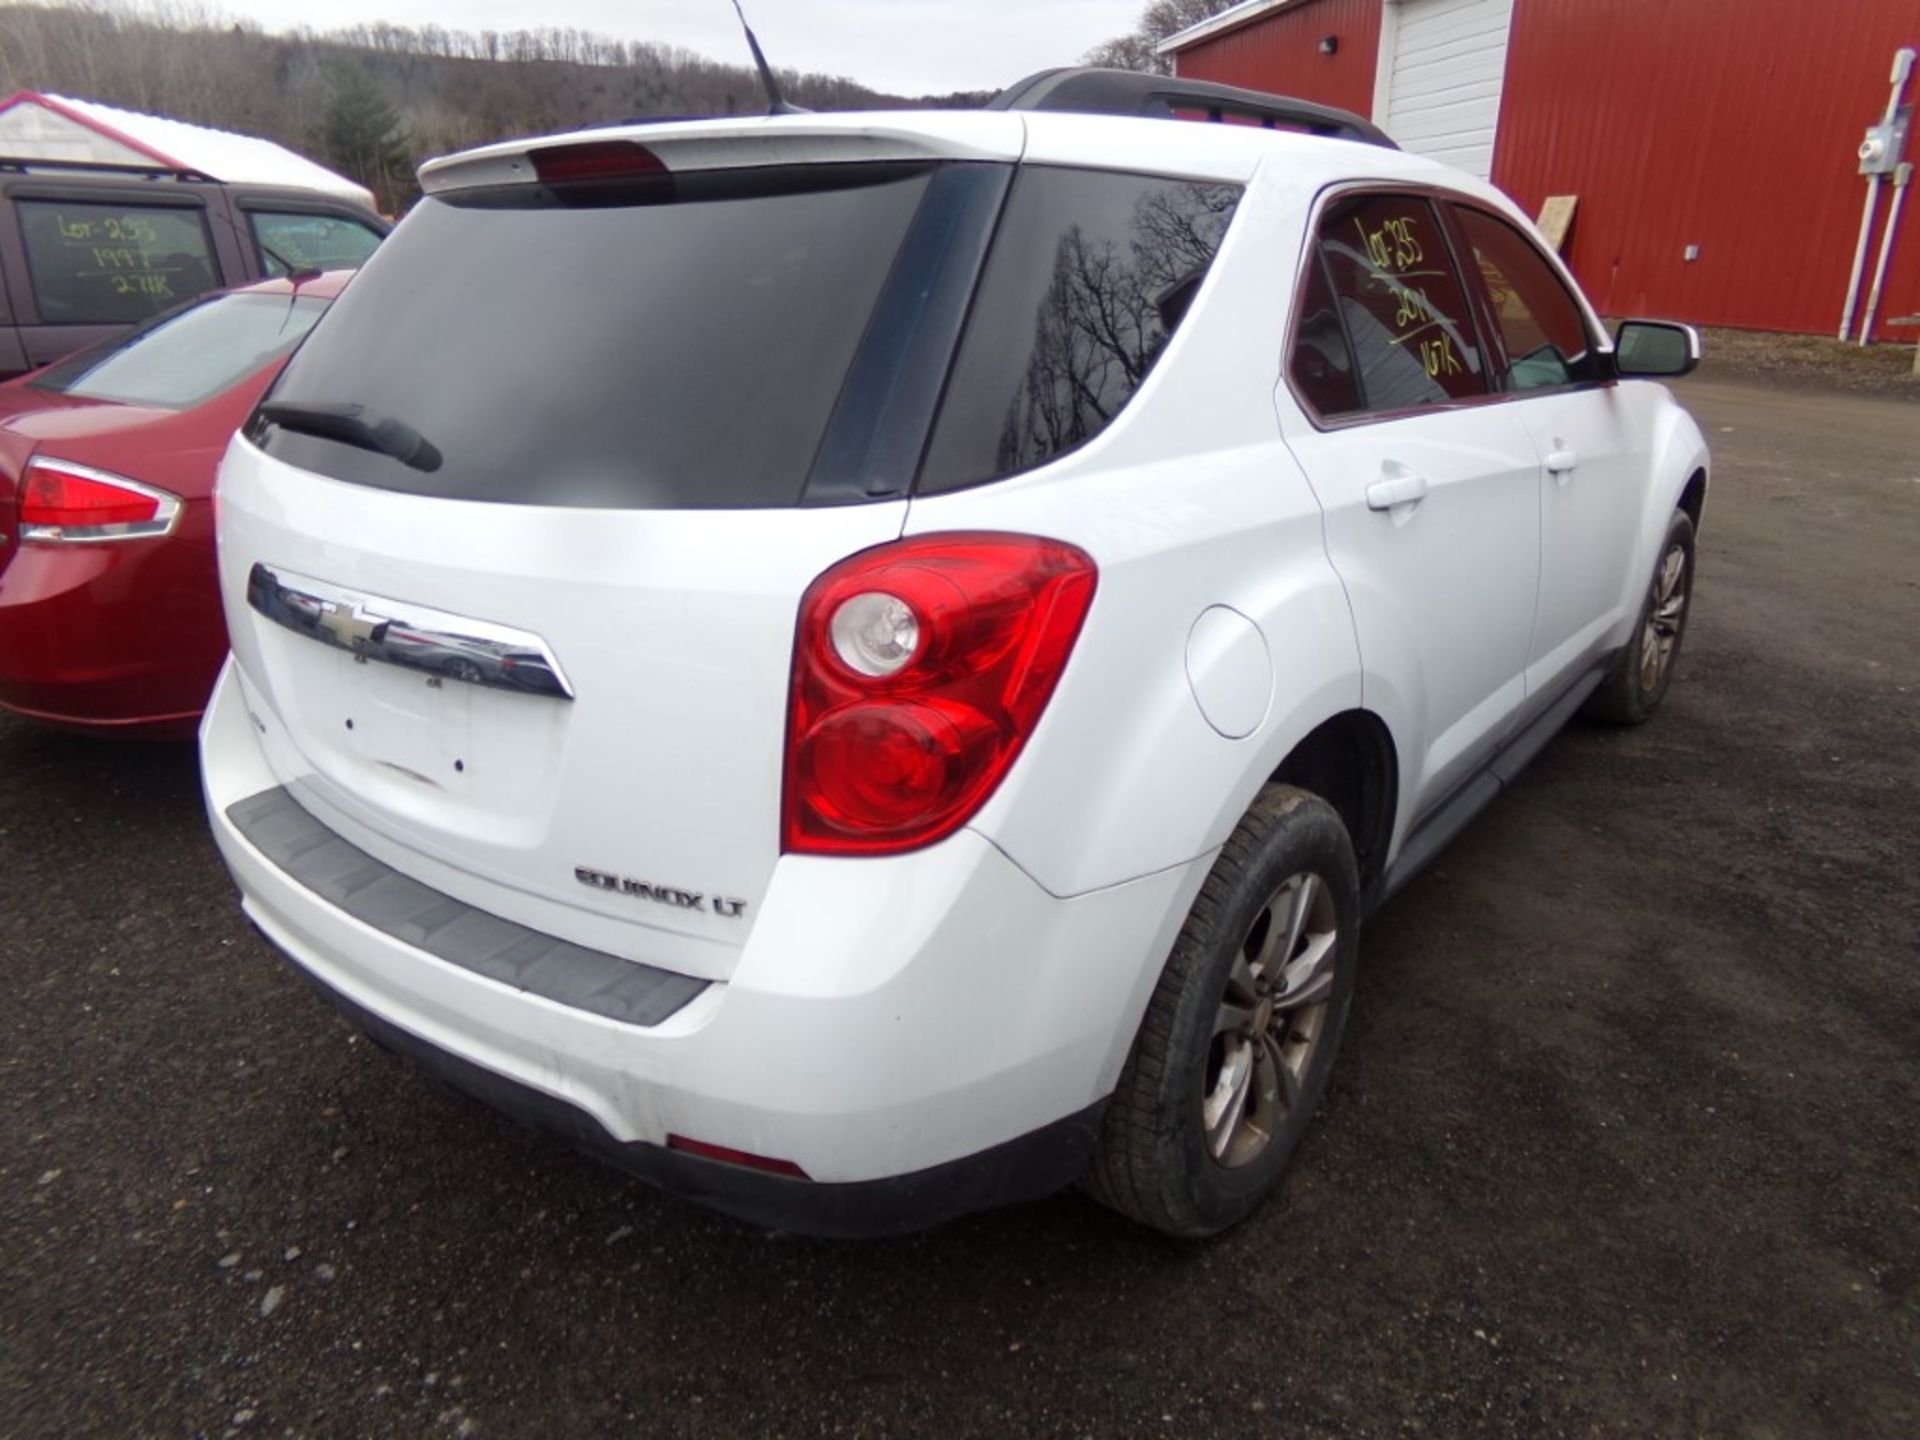 2011 Chevrolet Equinox LT, AWD, Suroof, White, 167,772 Miles, VIN#: 2CNFLEEC1B6326445 - OPEN TO - Image 3 of 6